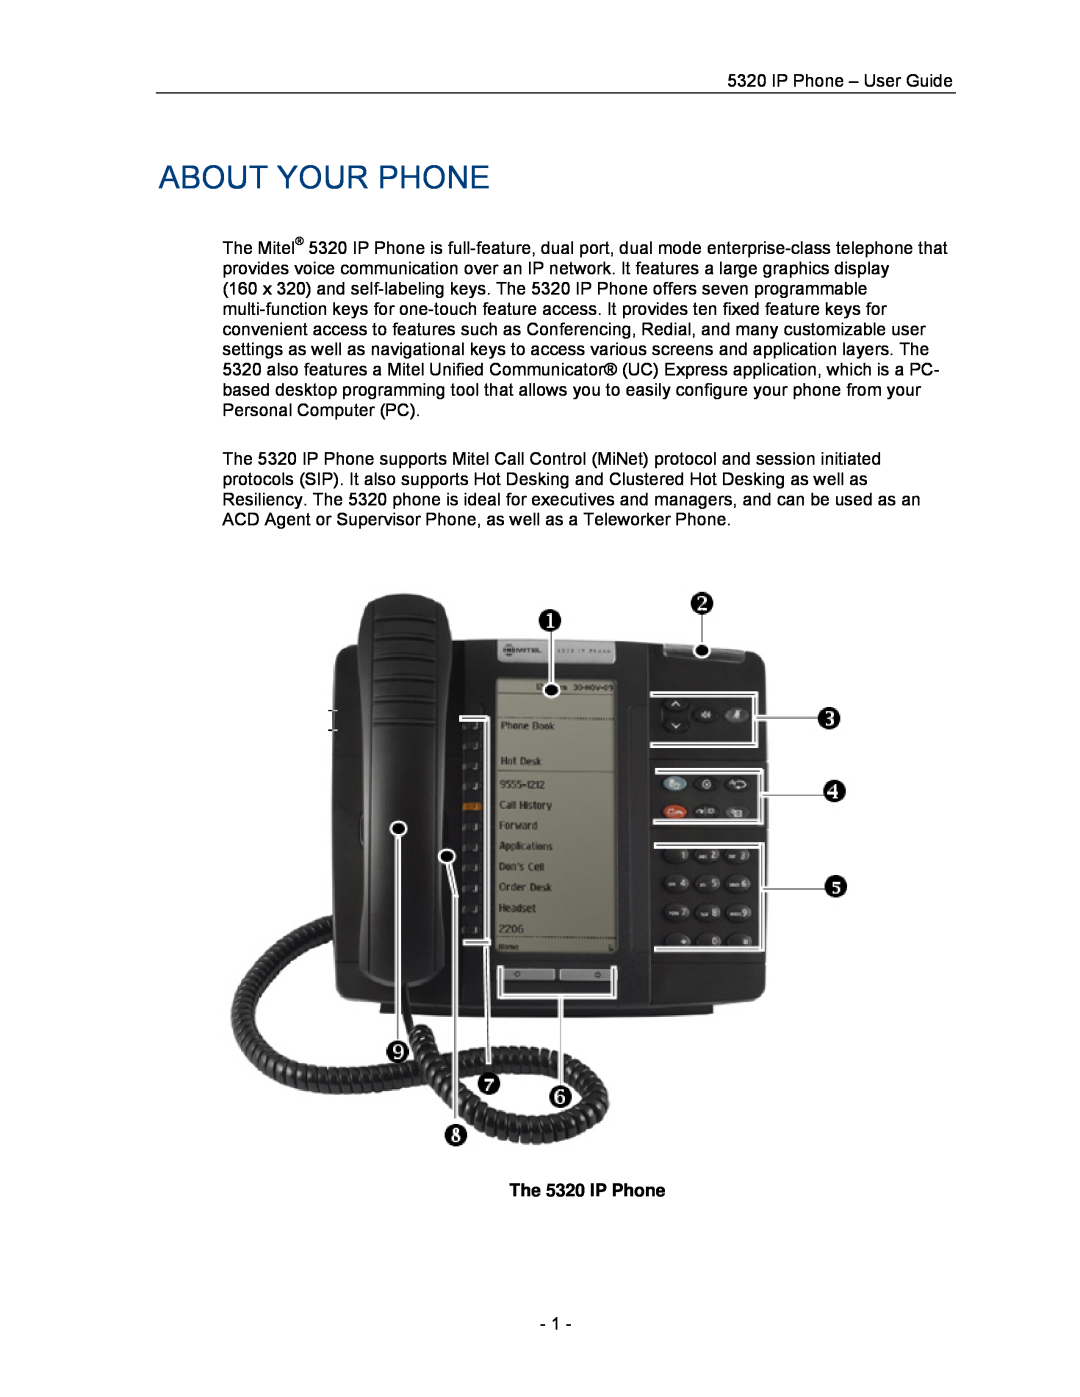 Mitel manual About Your Phone, The 5320 IP Phone 